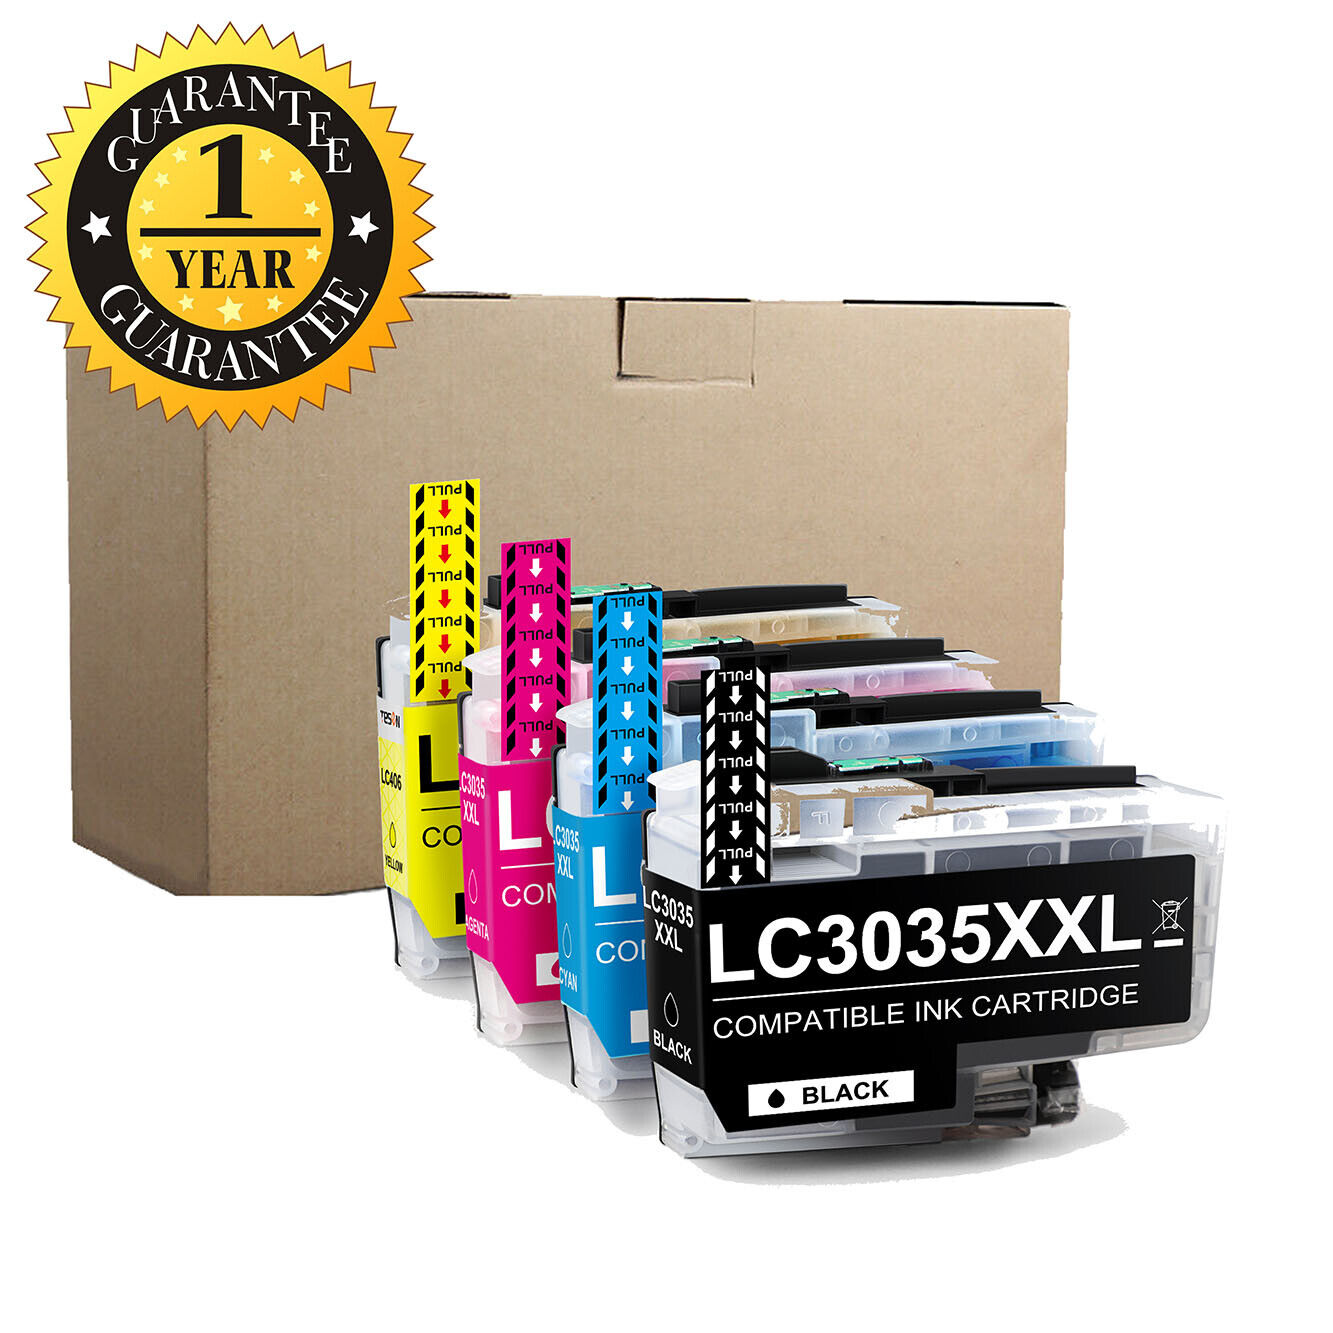 4 Pack LC3035 XXL Compatible Ink Cartridge for Brother MFC-J995DW MFC-J805DW